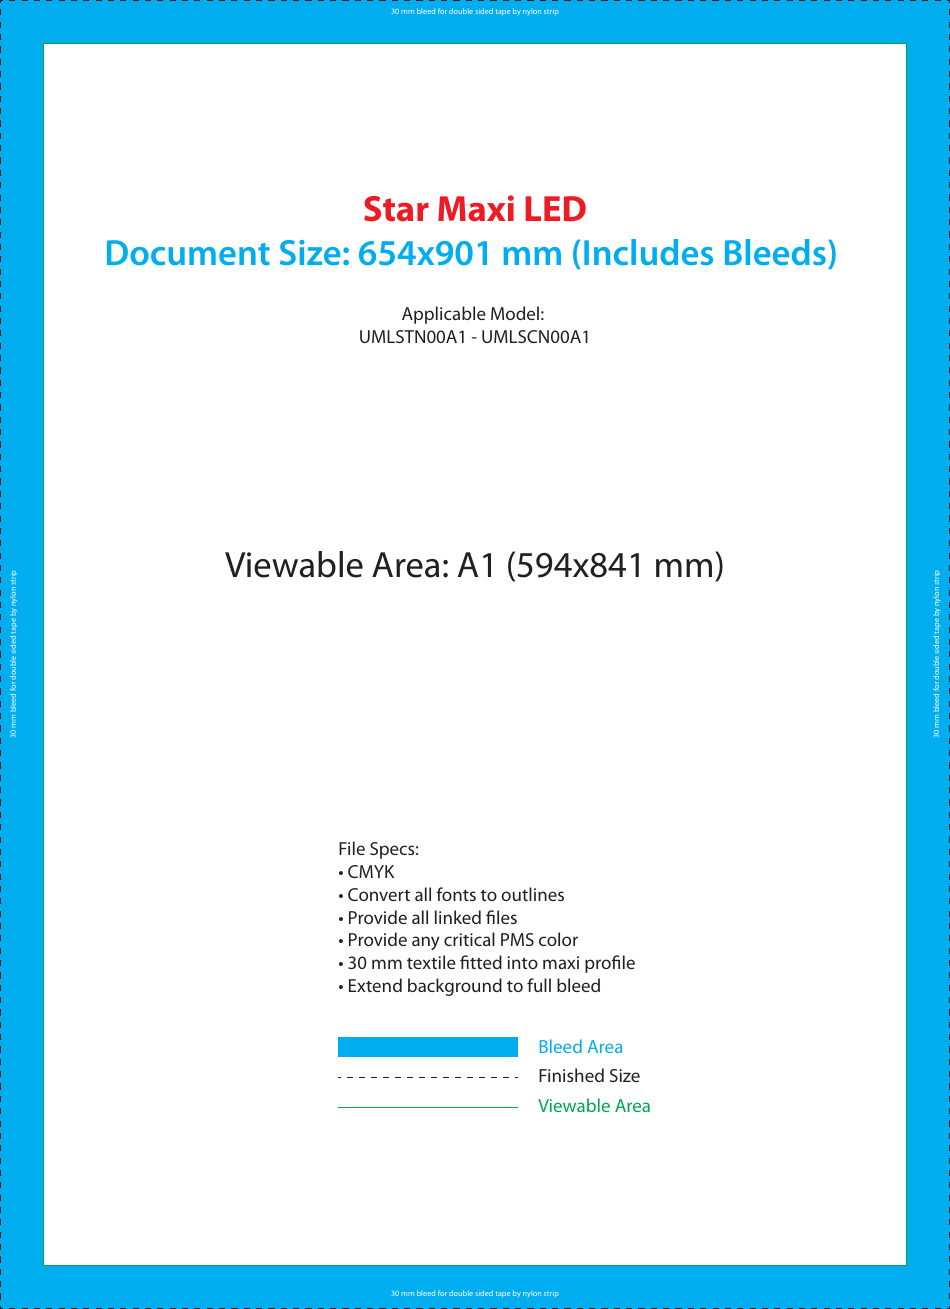 Star Maxi LED Print Template - Customizable Documents for Effective LED Printing